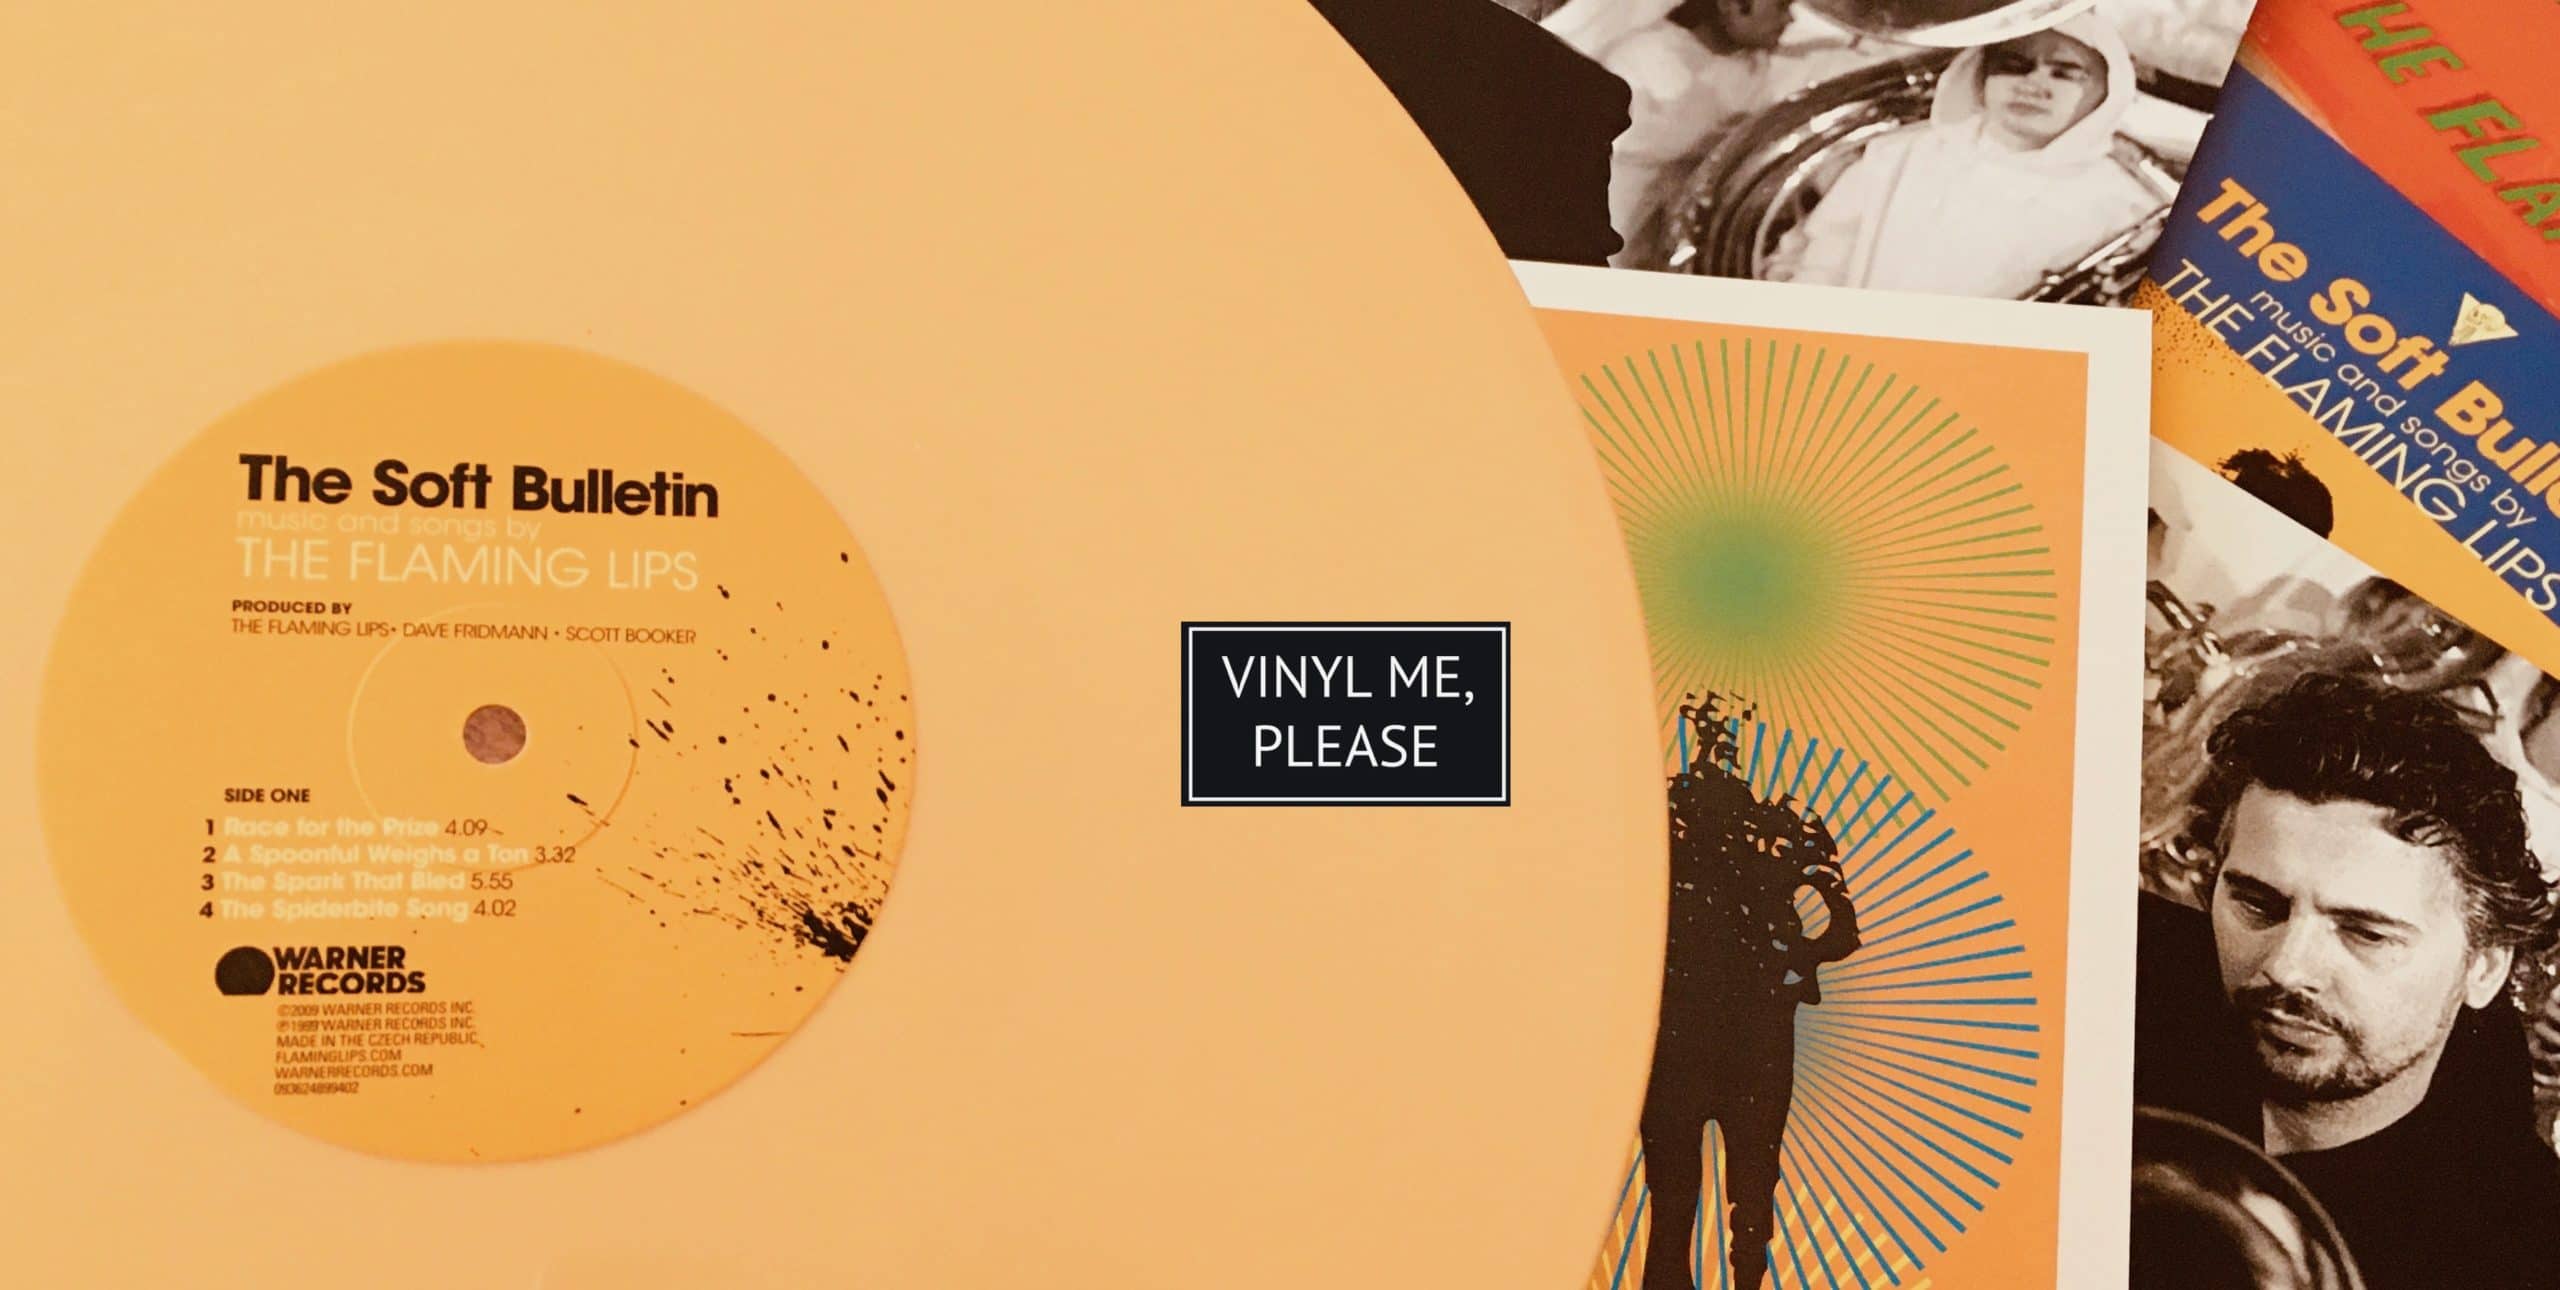 Vinyl me, please october edition: the flaming lips – ‘the soft bulletin’